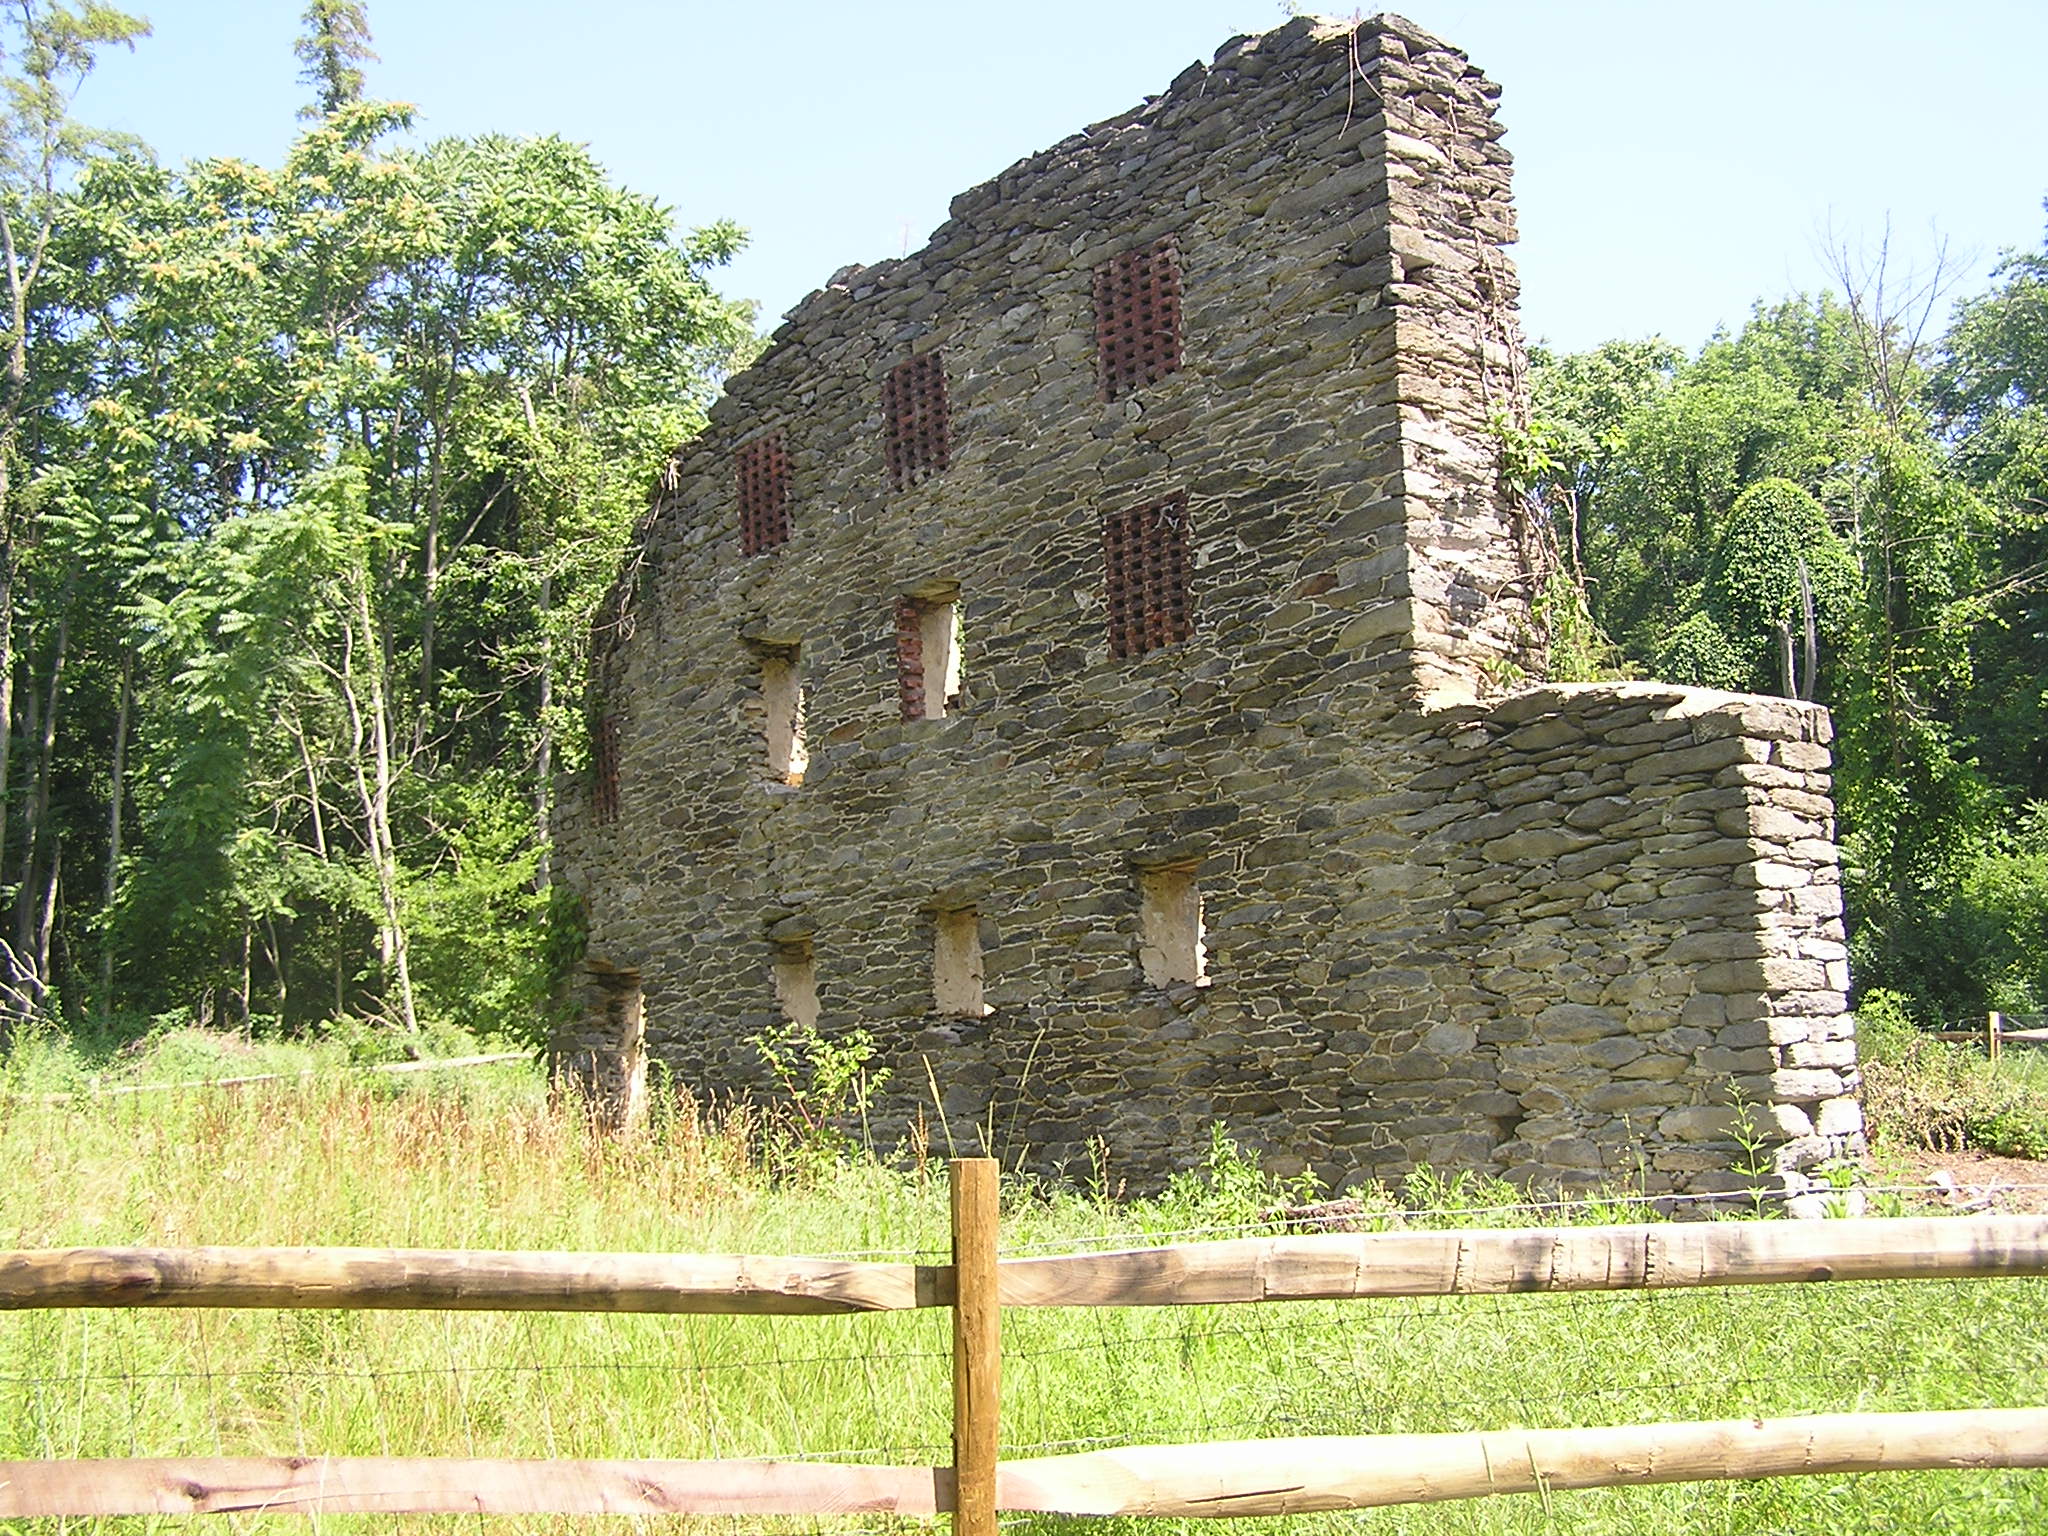 Image of the Ruins at the Camp Michaux Historic Site